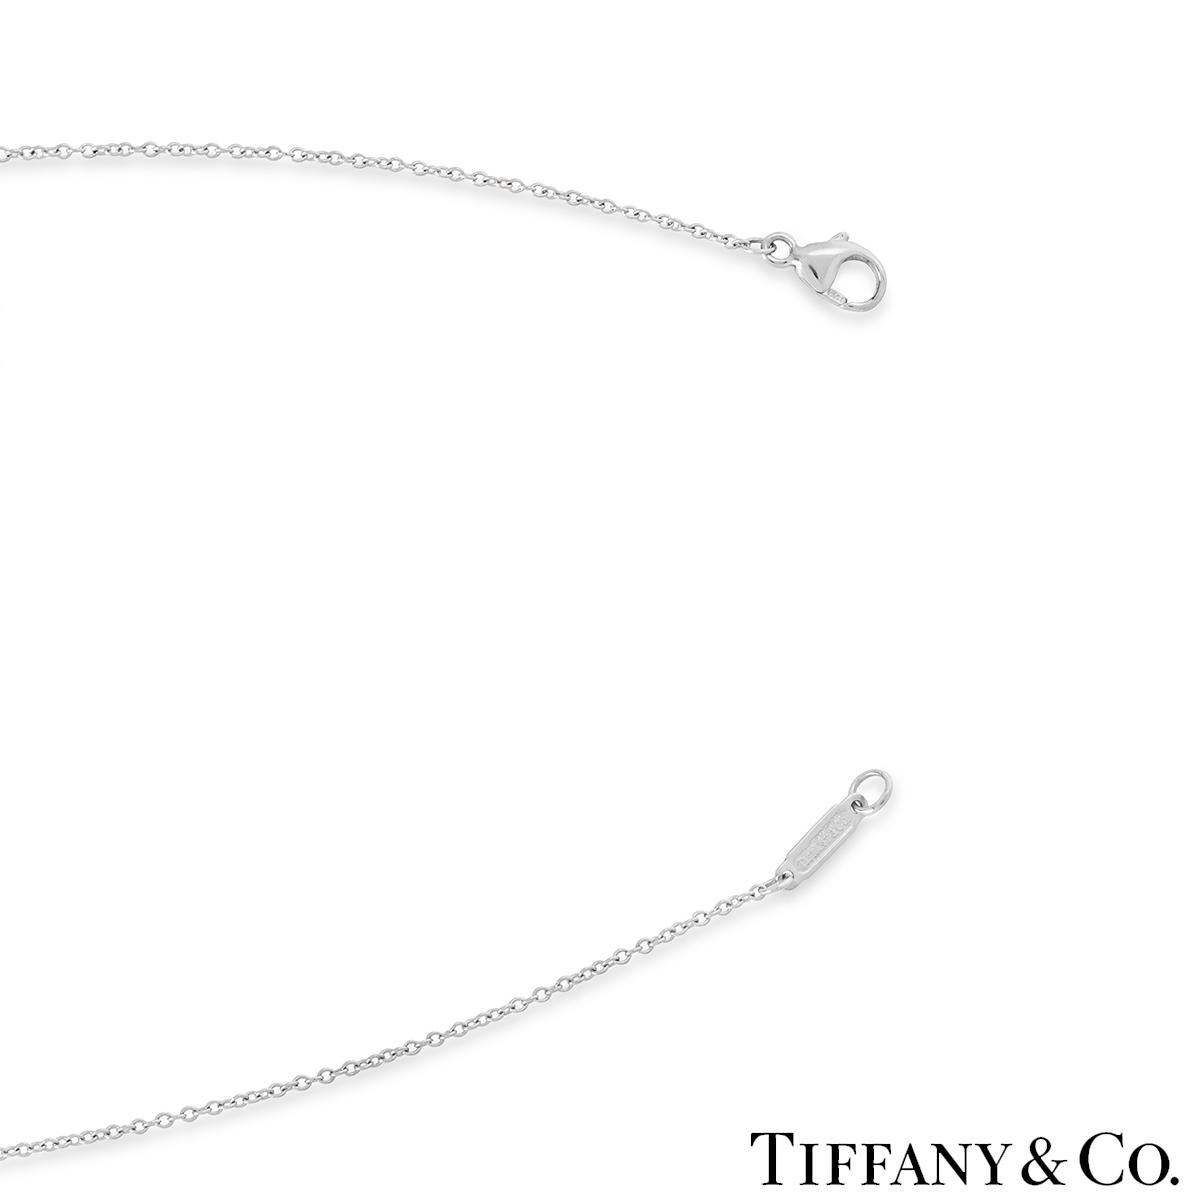 Tiffany & Co. Platinum Diamond Heart Pendant In Excellent Condition For Sale In London, GB